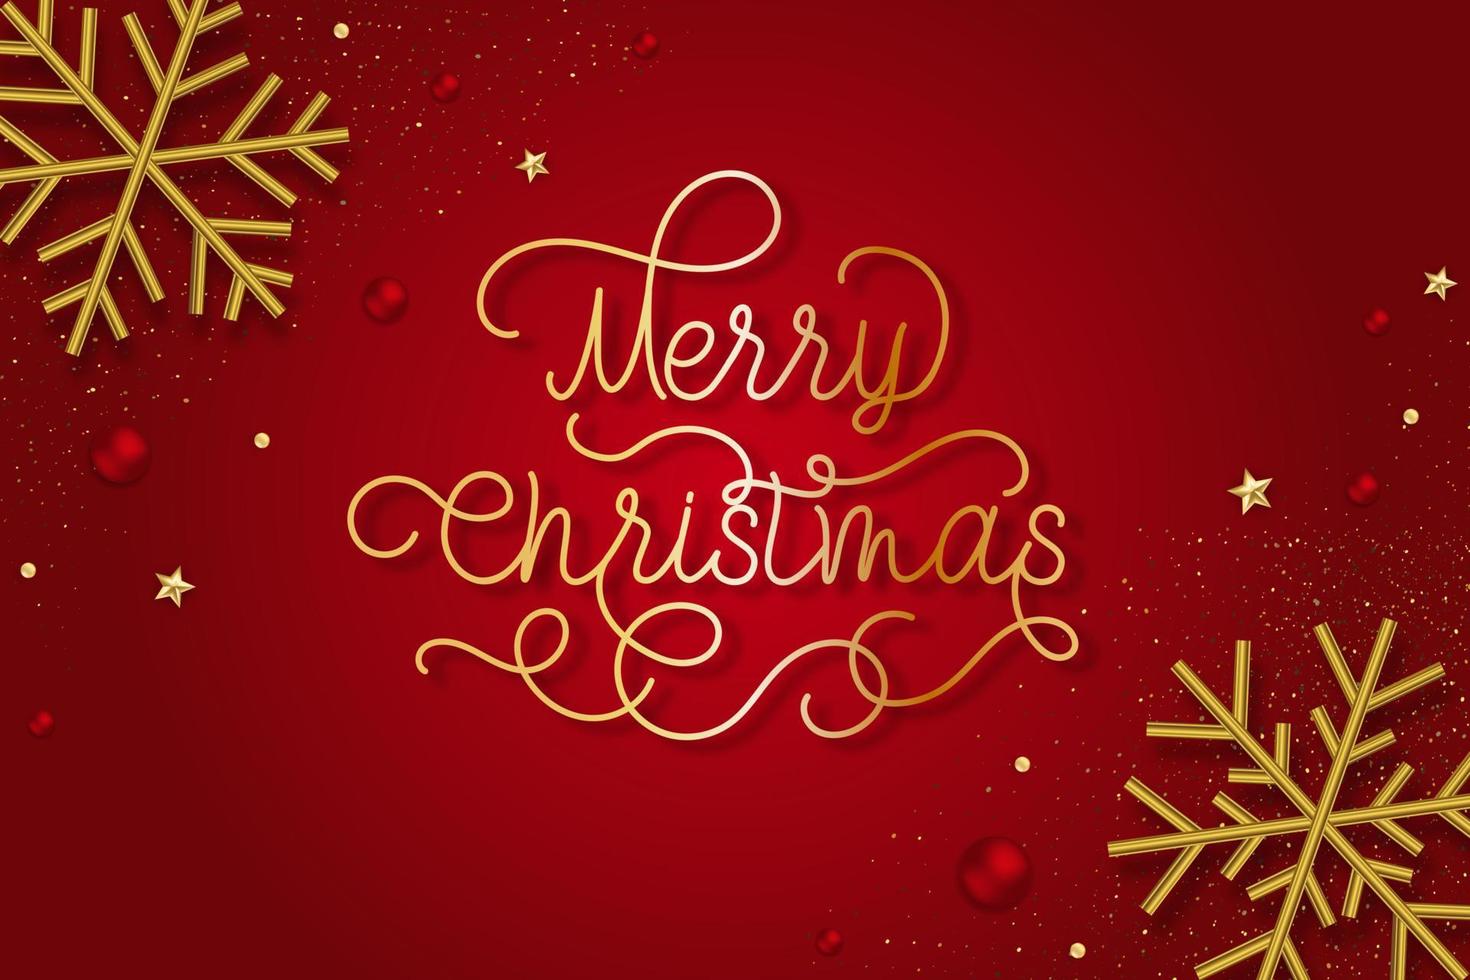 Merry Christmas background with gold 3D snowflakes and calligraphy on red background. vector